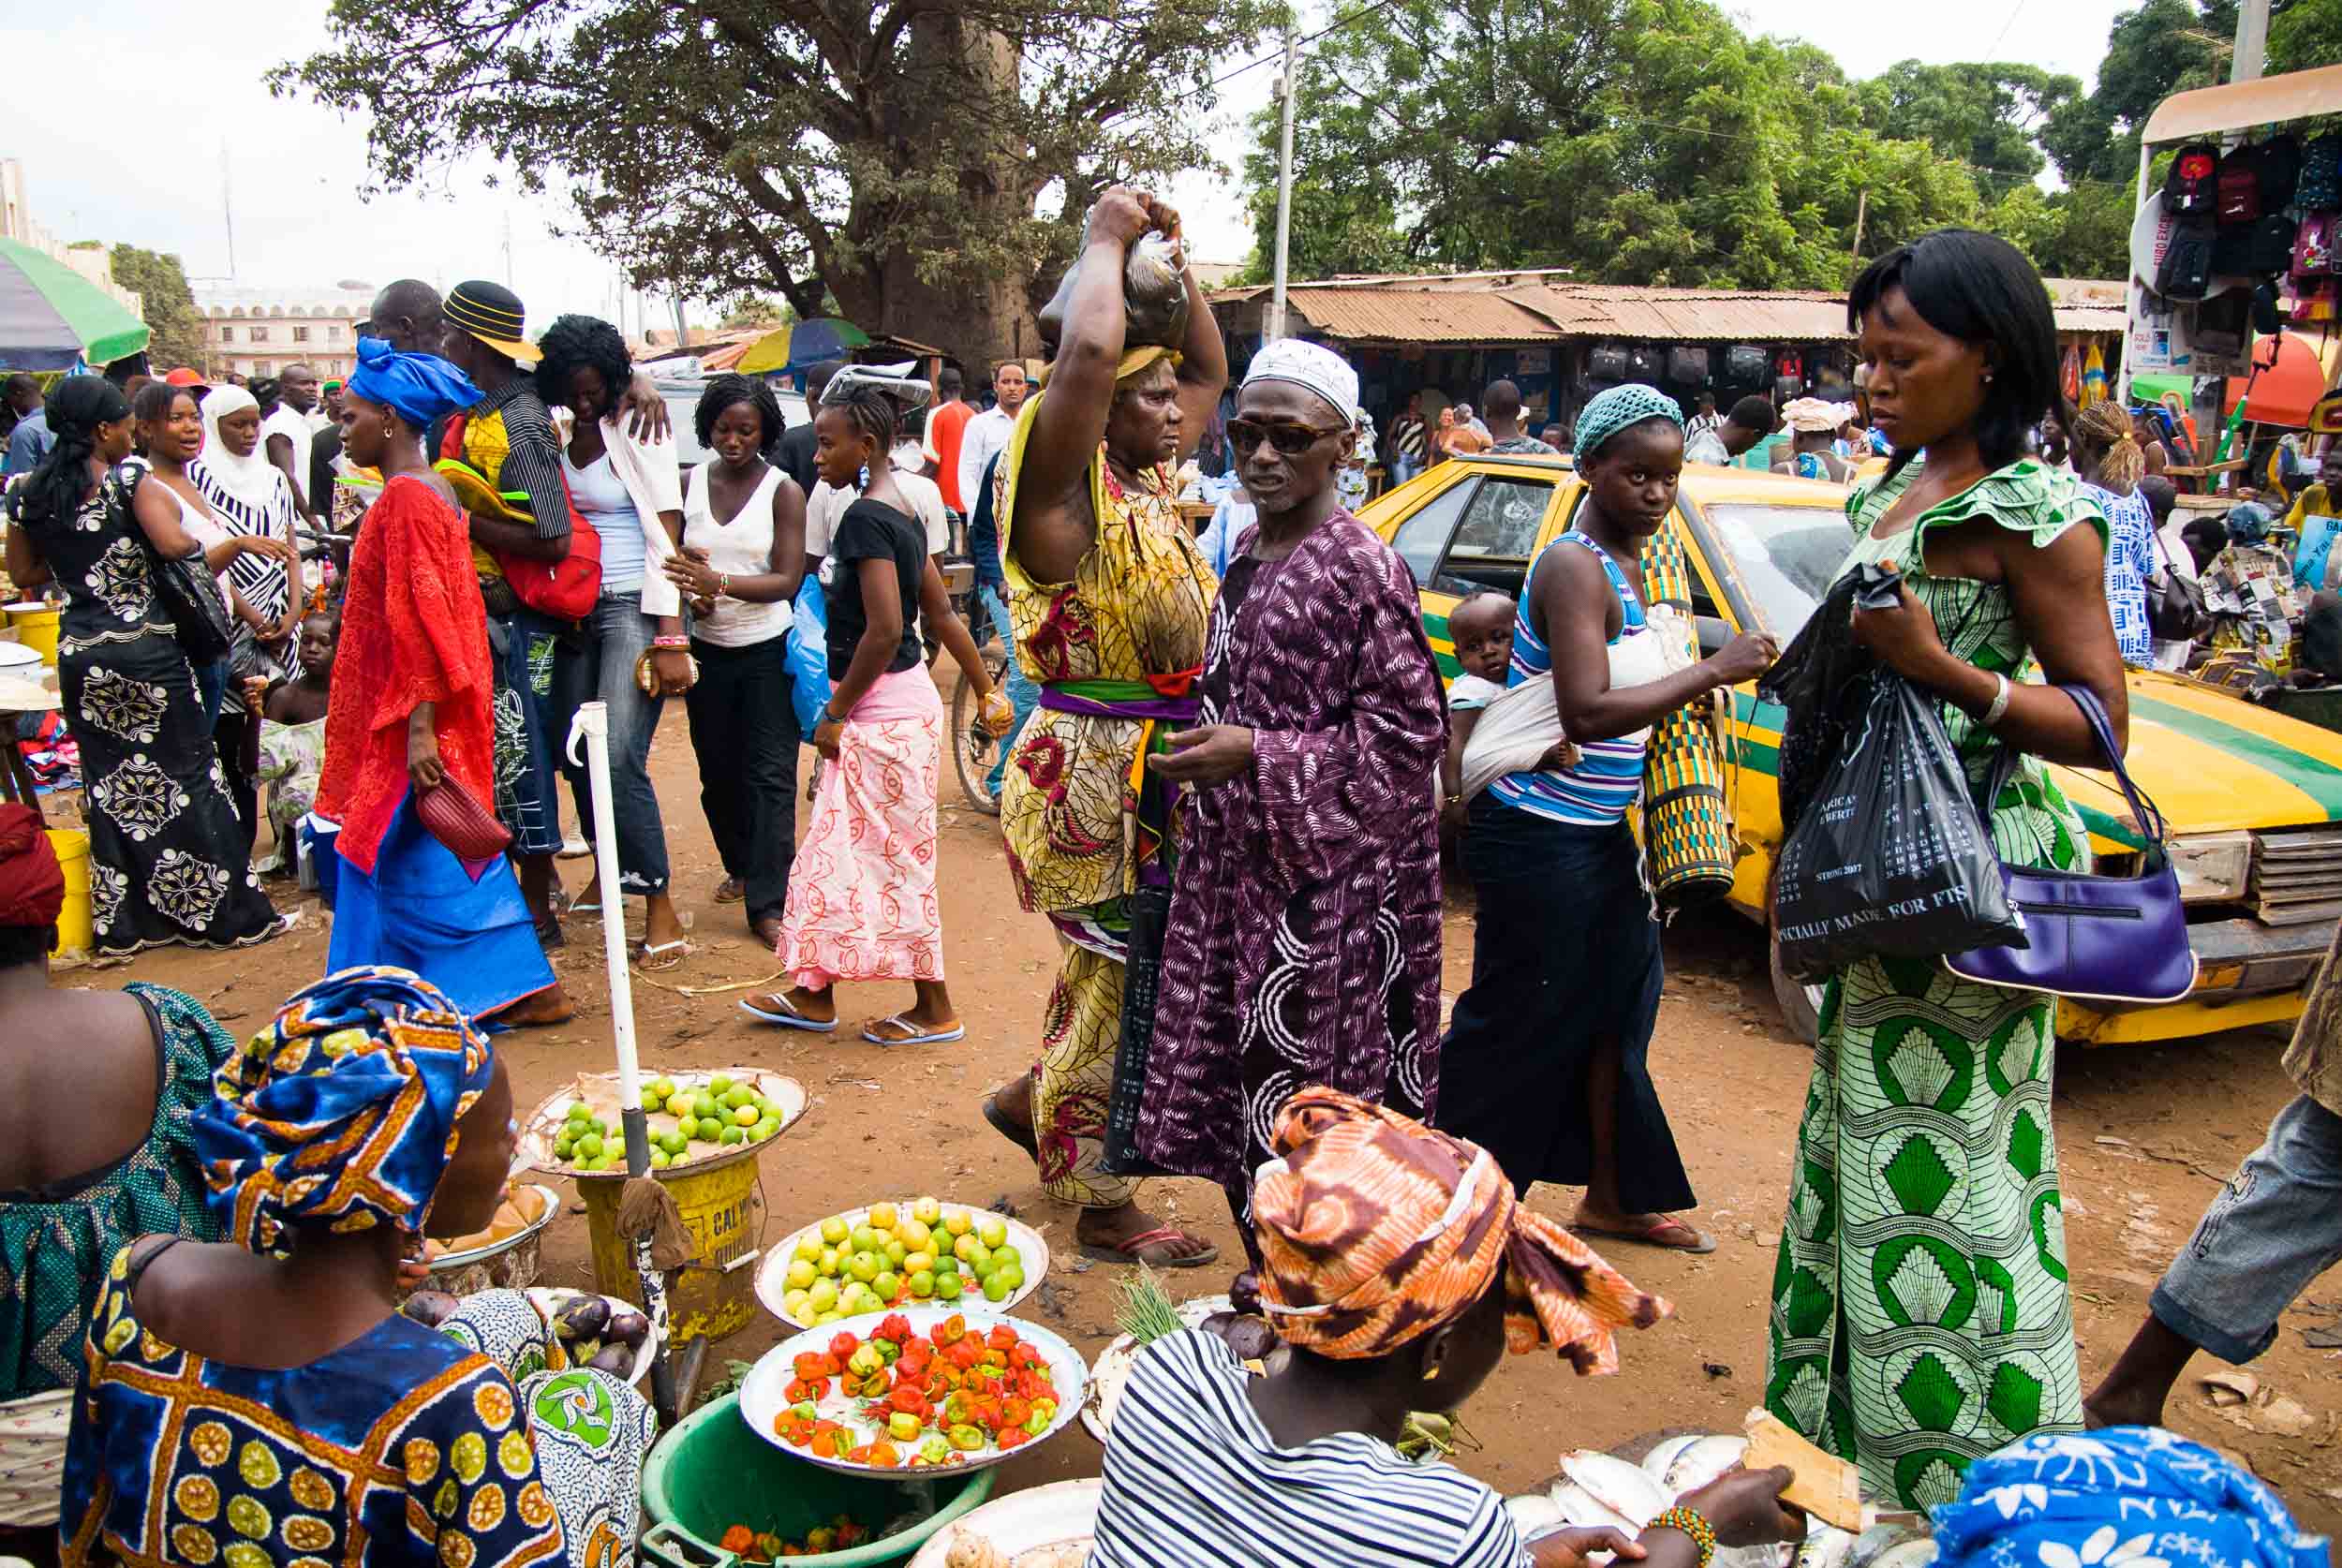  Open Air Market, Gambia, Africa 